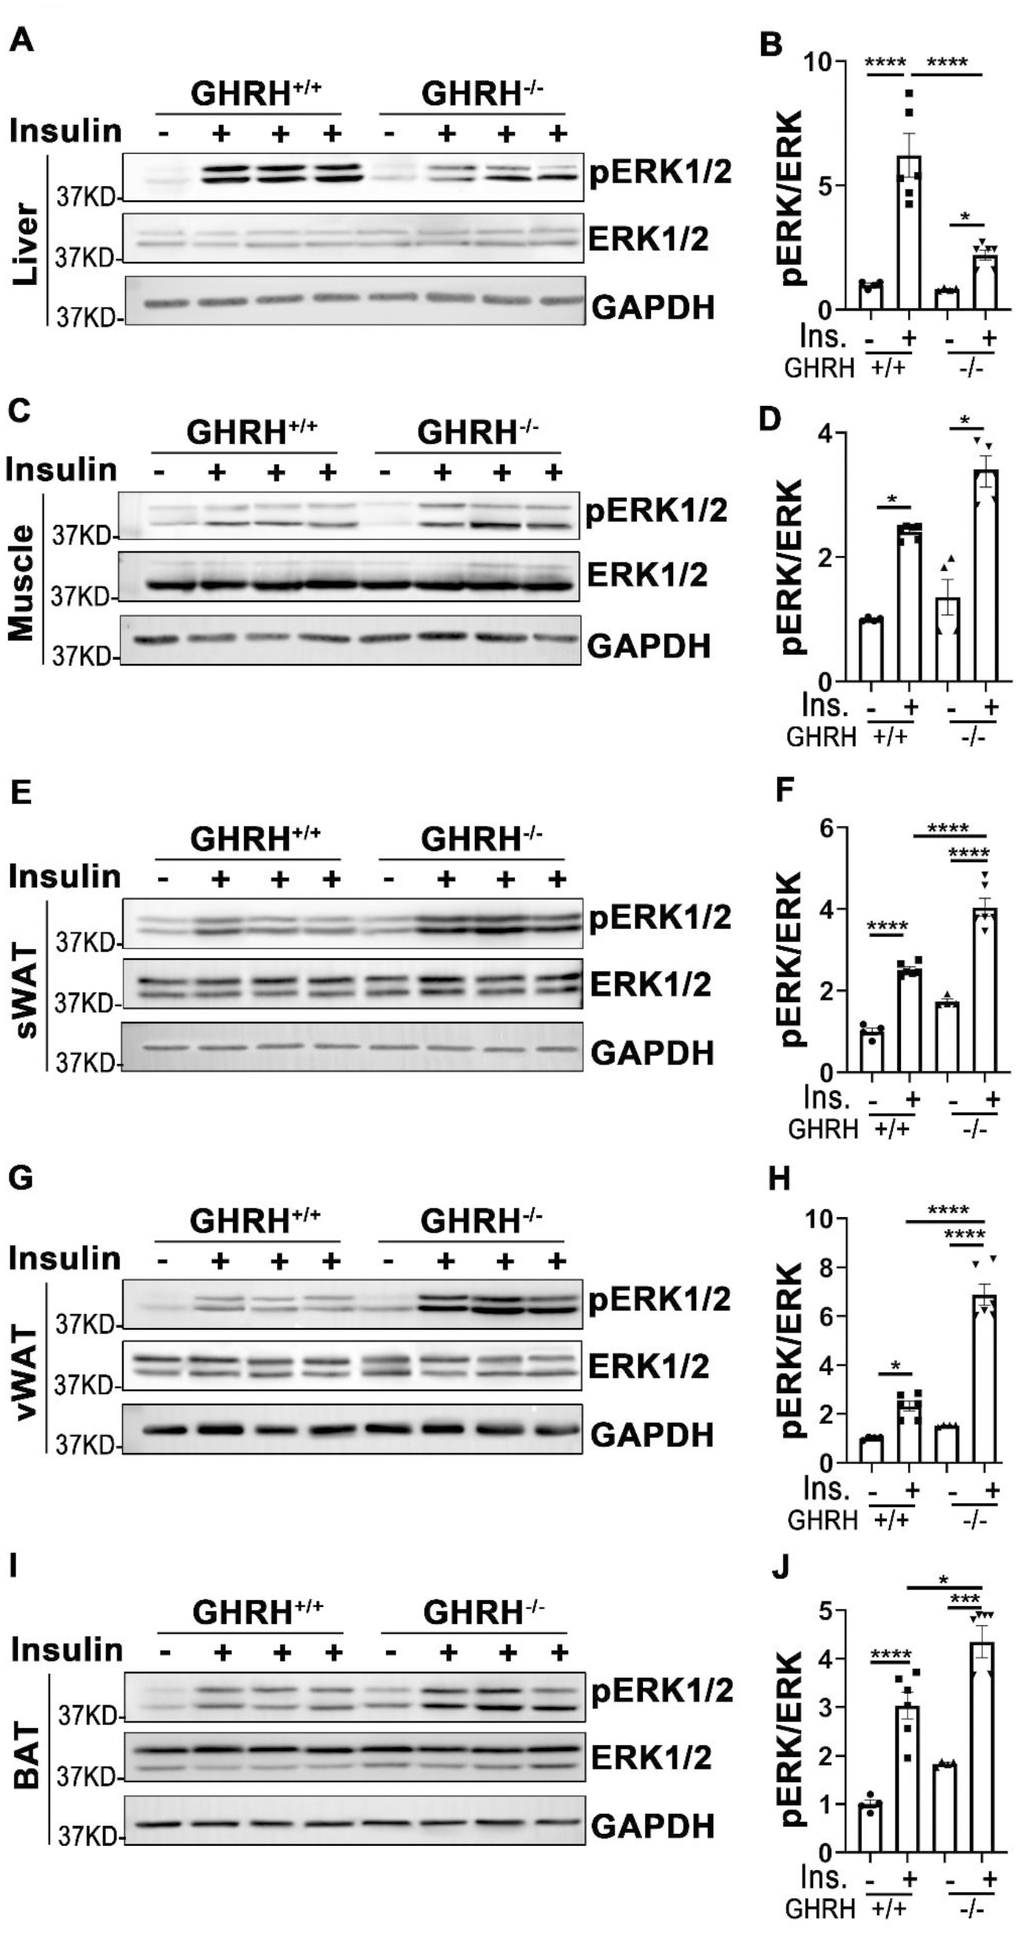 Analysis of insulin-induced activation of ERK1/2 in metabolically active tissues of GHRH-/- mice. (A, B) Activation of ERK1/2 in liver. (C, D) Activation of ERK1/2 in skeletal muscle. (E, F) Activation of ERK1/2 in subcutaneous white adipose tissue. (G, H) Activation of ERK1/2 in visceral white adipose tissue. (I, J) Activation of ERK1/2 in interscapular brown adipose tissue. The 4 hours fasted mice were injected i.p. with porcine insulin (1 IU/kg of body weight). After 20 min, tissues were collected to perform western blots. All data (means ± sem) were expressed as fold change compared to vehicle treated WT controls (defined as 1.0) (n=4 for WT group; n=6 for GHRH-/- mice). Statistical analysis was performed by unpaired Student’s t-test, * P P P P 